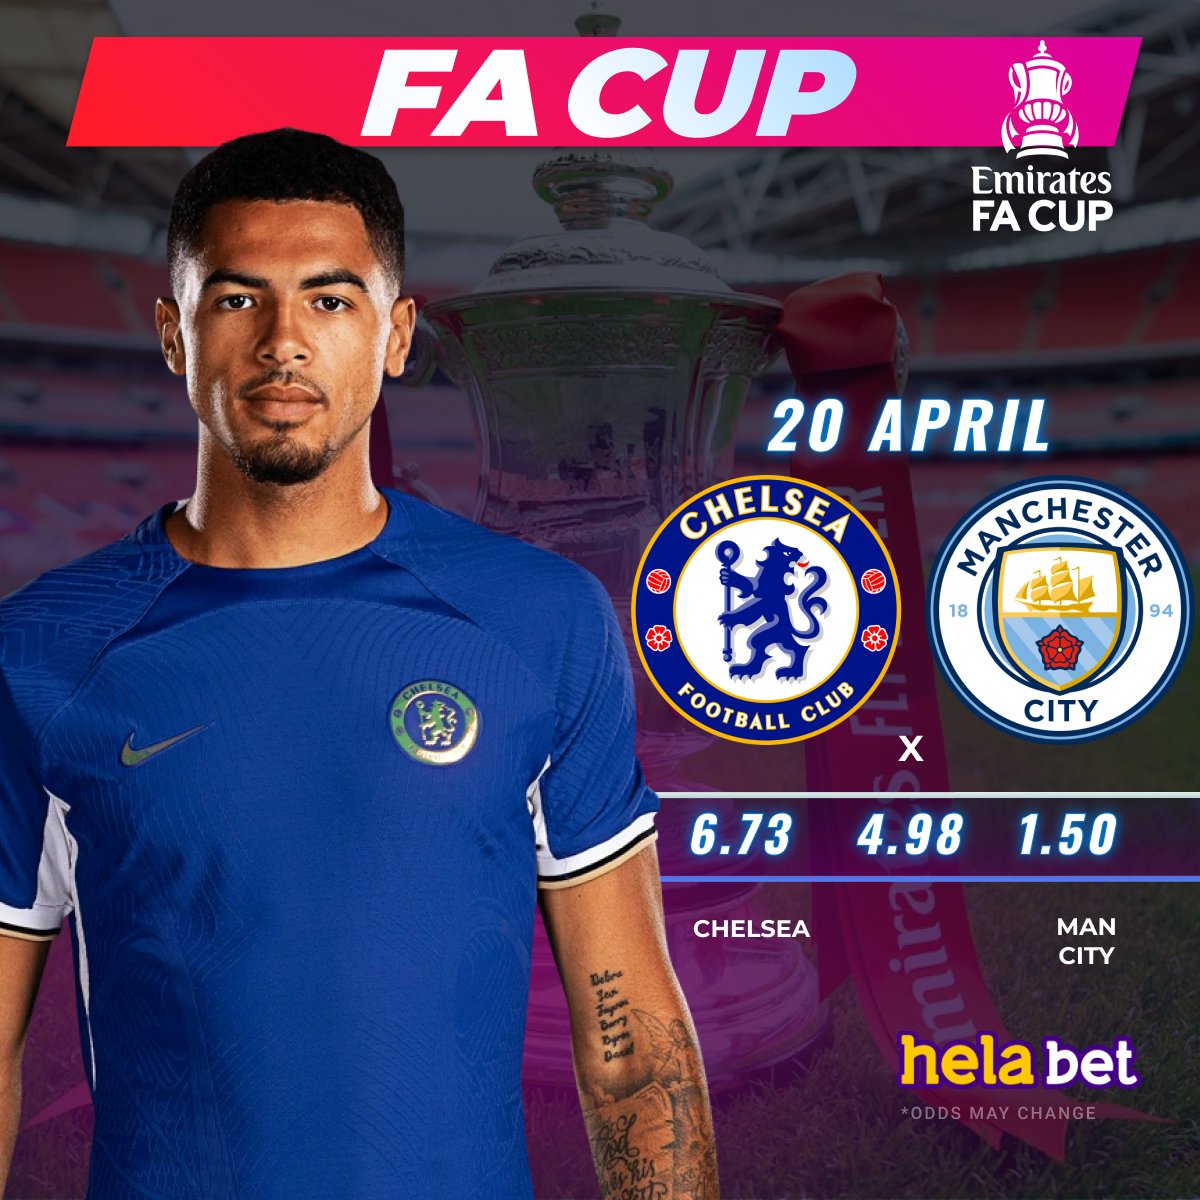 🇬🇧 FA CUP 🇬🇧 ⚽ #ManCity VS #Chelsea 👉 Bet on the match in #helabet 👉 cutt.ly/UwY8h1uG #facup #football #betting